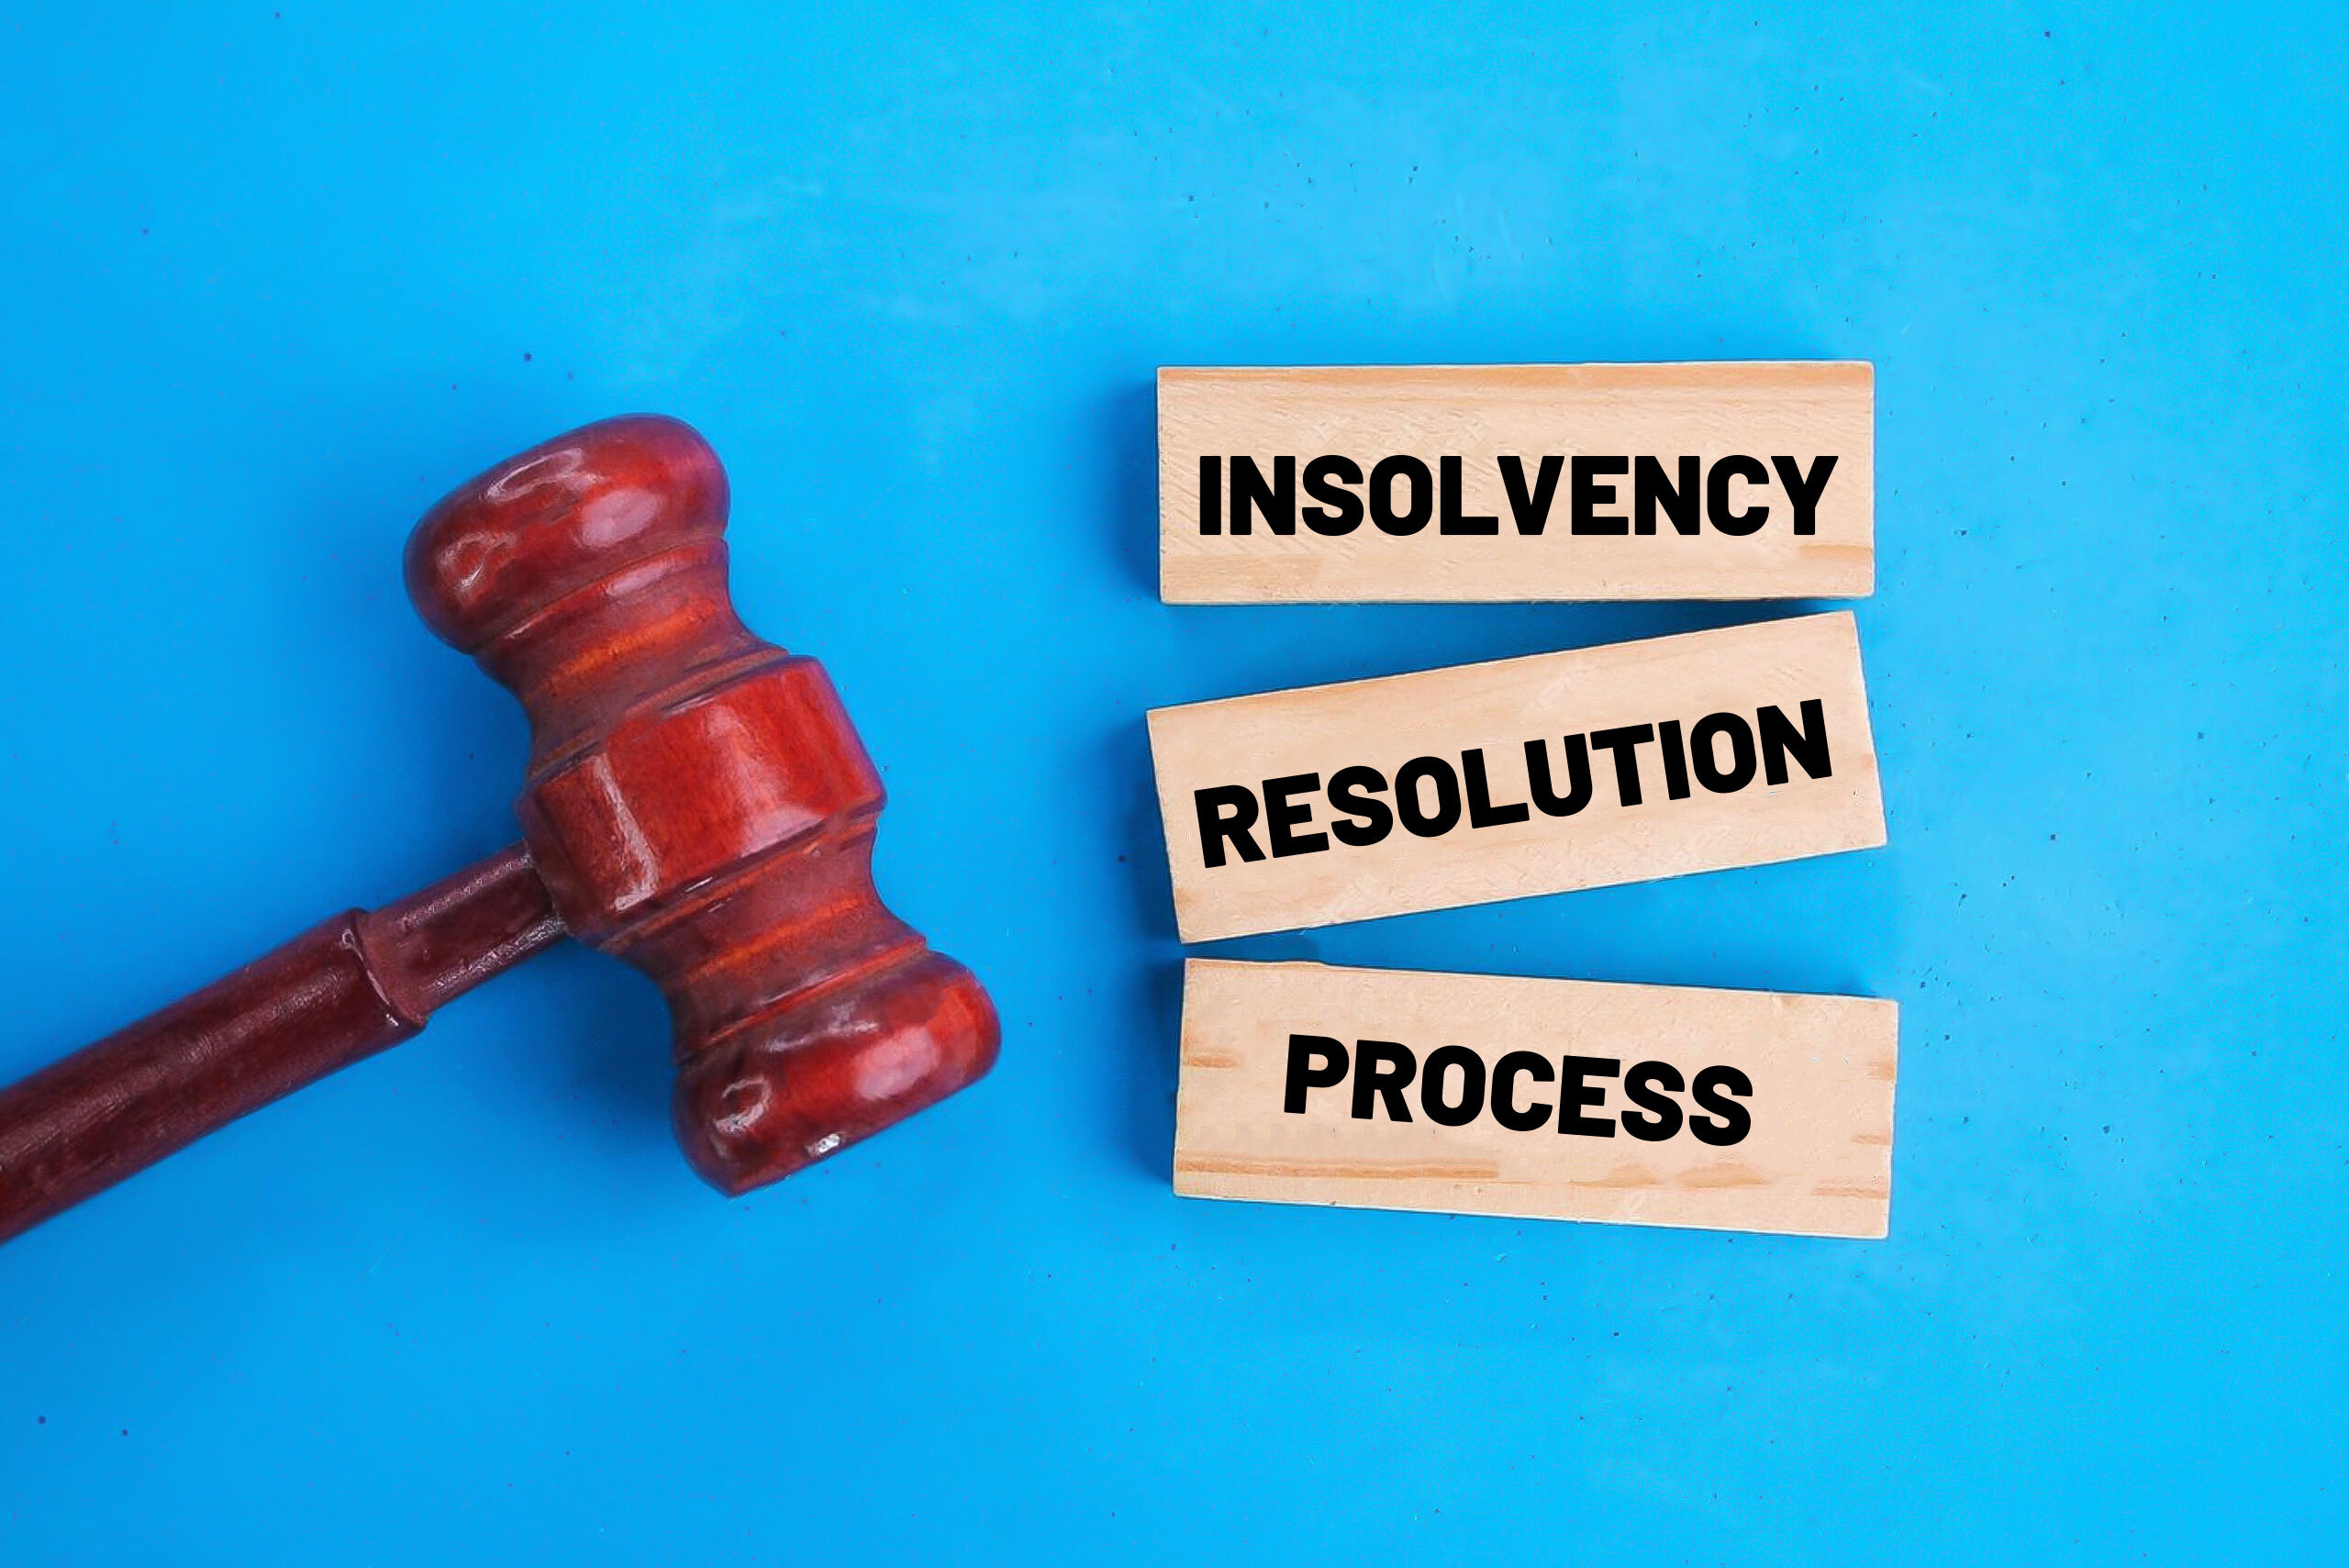 Amended Regulations for Speeding Up the Insolvency Resolution Process